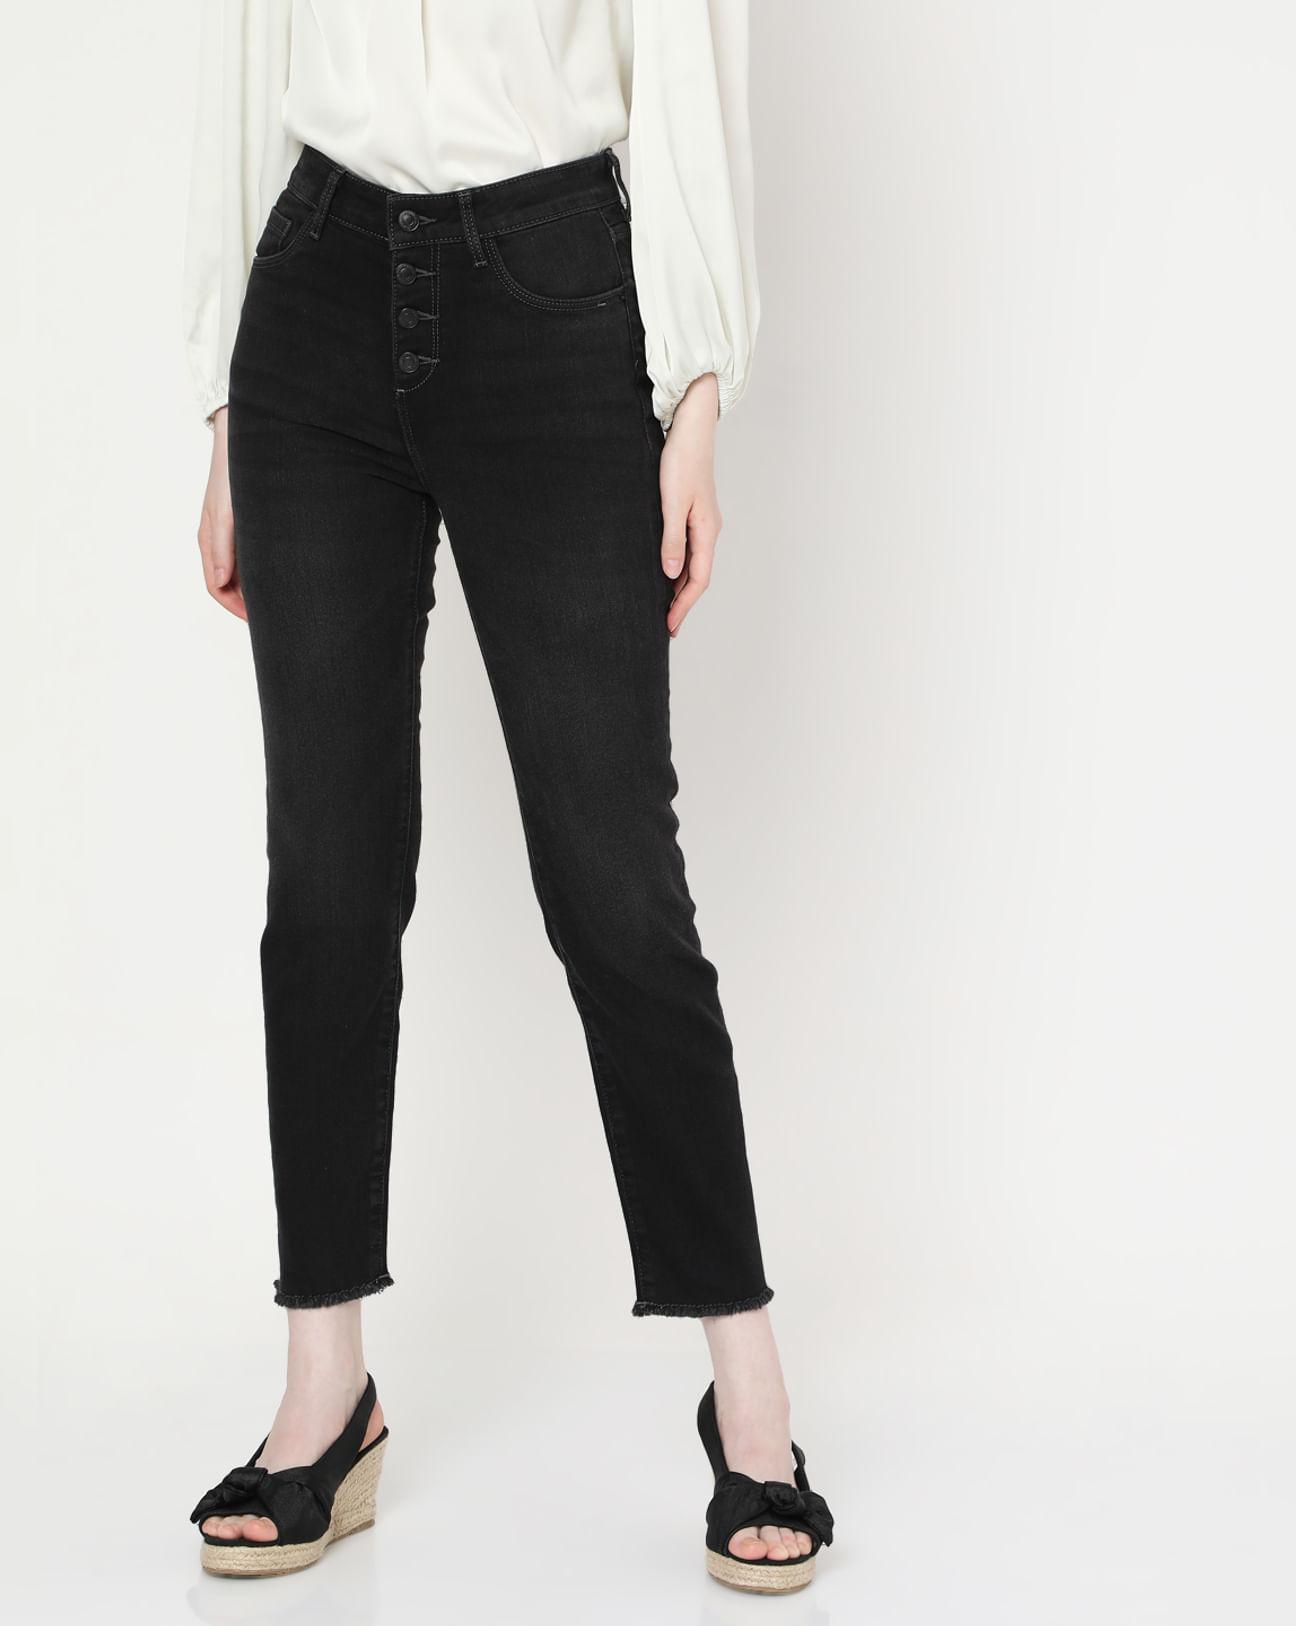 grey-high-rise-buttoned-regular-fit-jeans